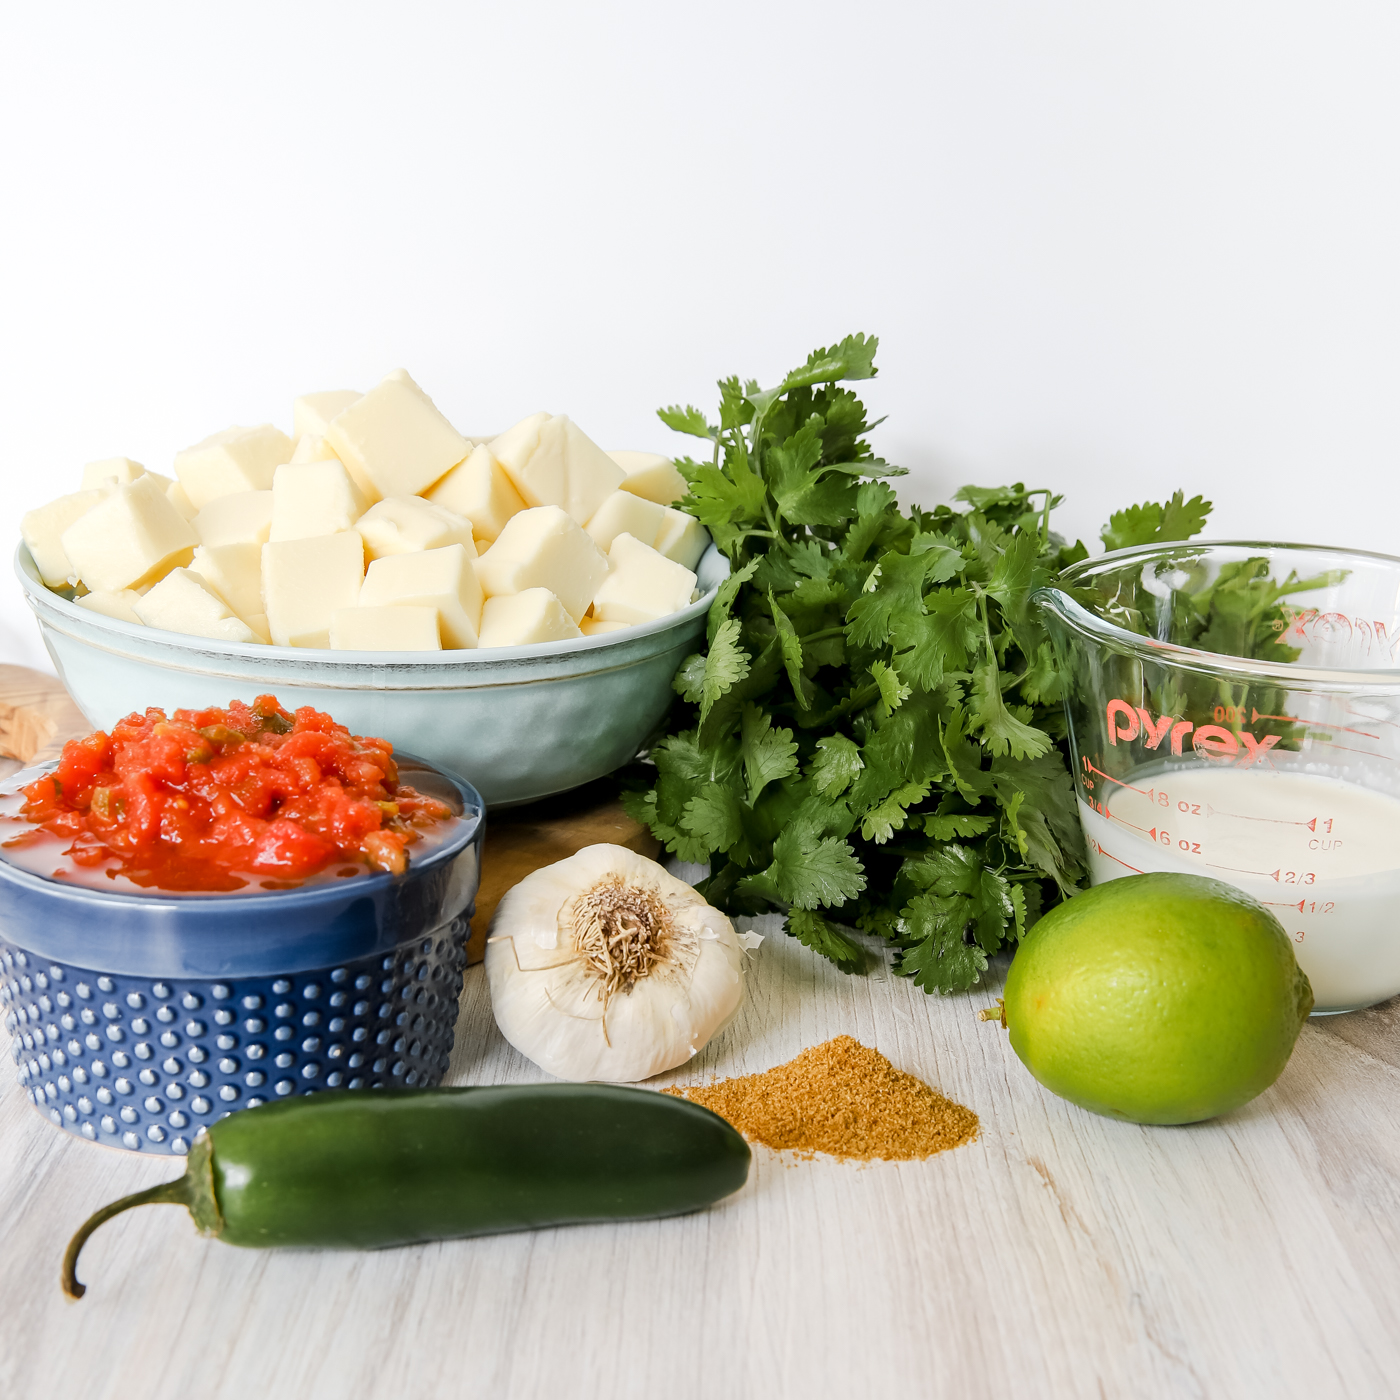 Ingredients for White Queso Dip